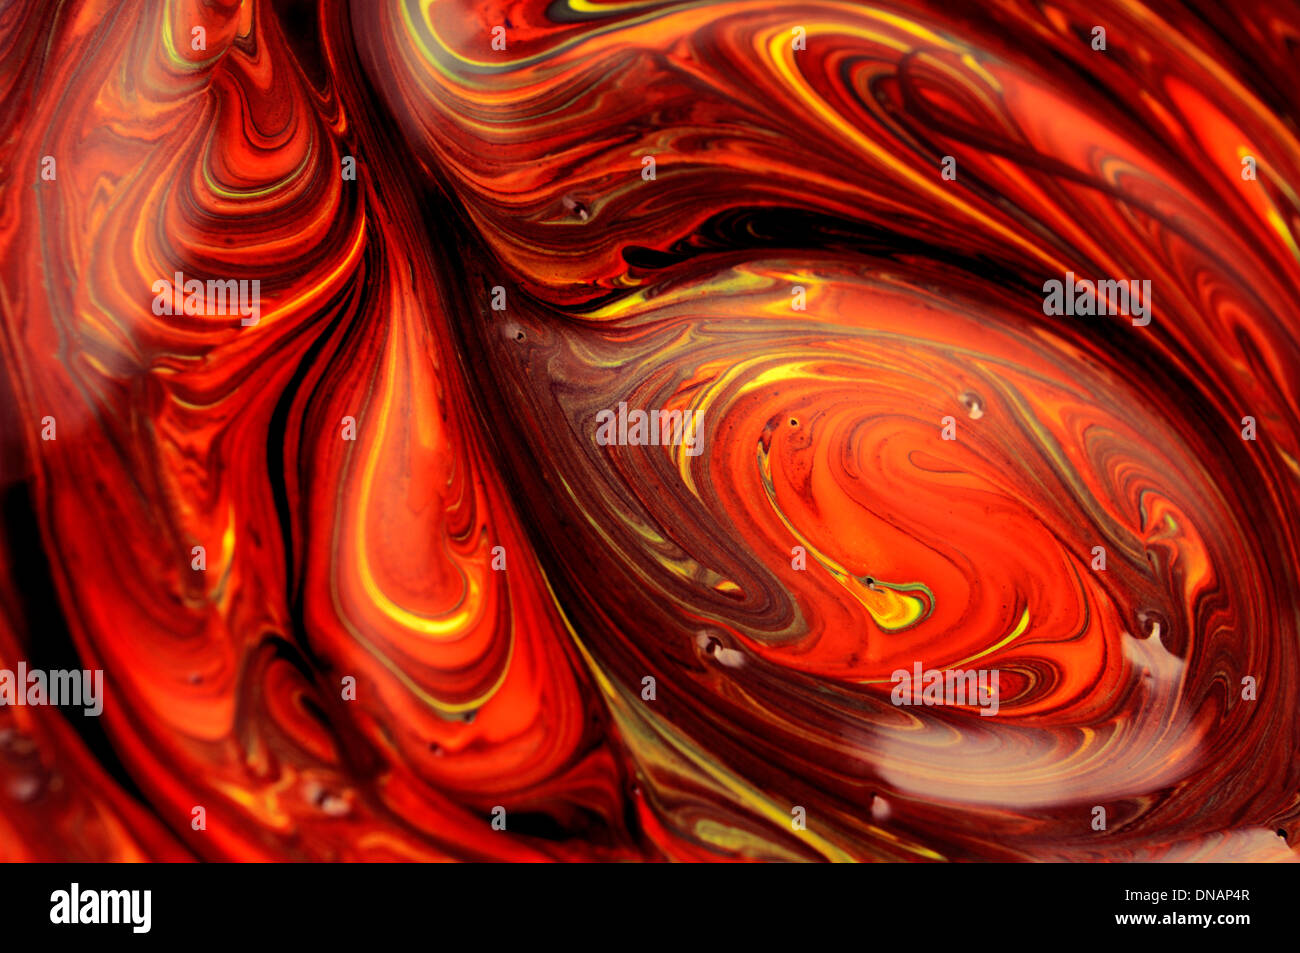 Abstract art work with smeared red orange paint and digital processing Stock Photo